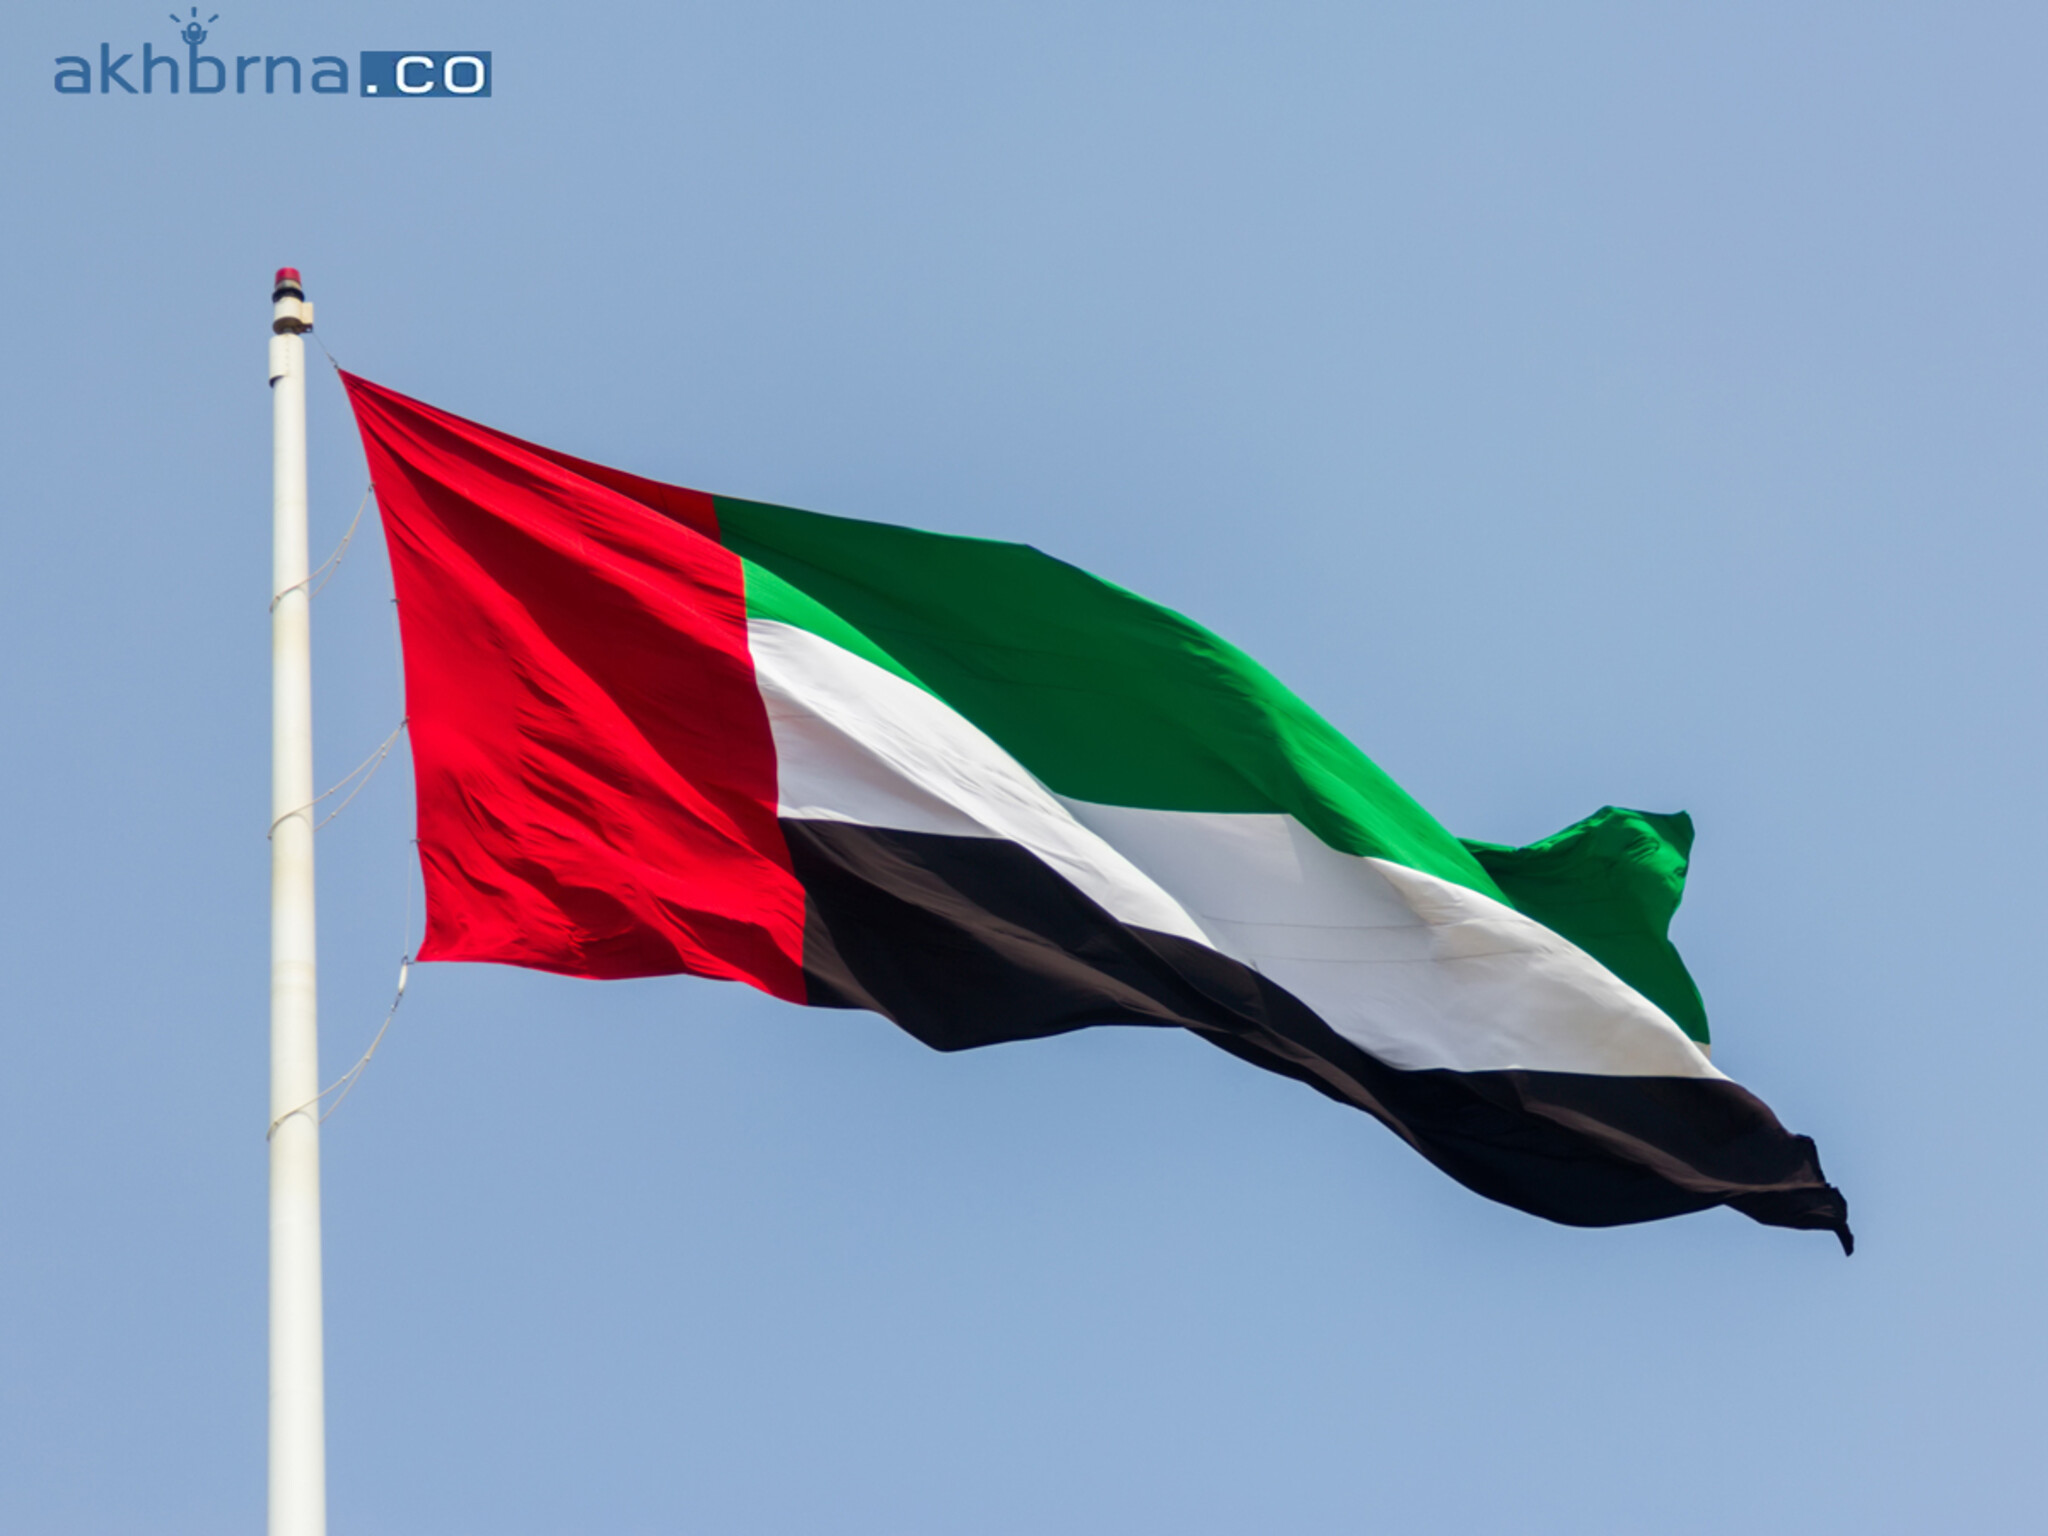 UAE: Up to 1 million AED fine or imprisonment as a punishment for hate speech